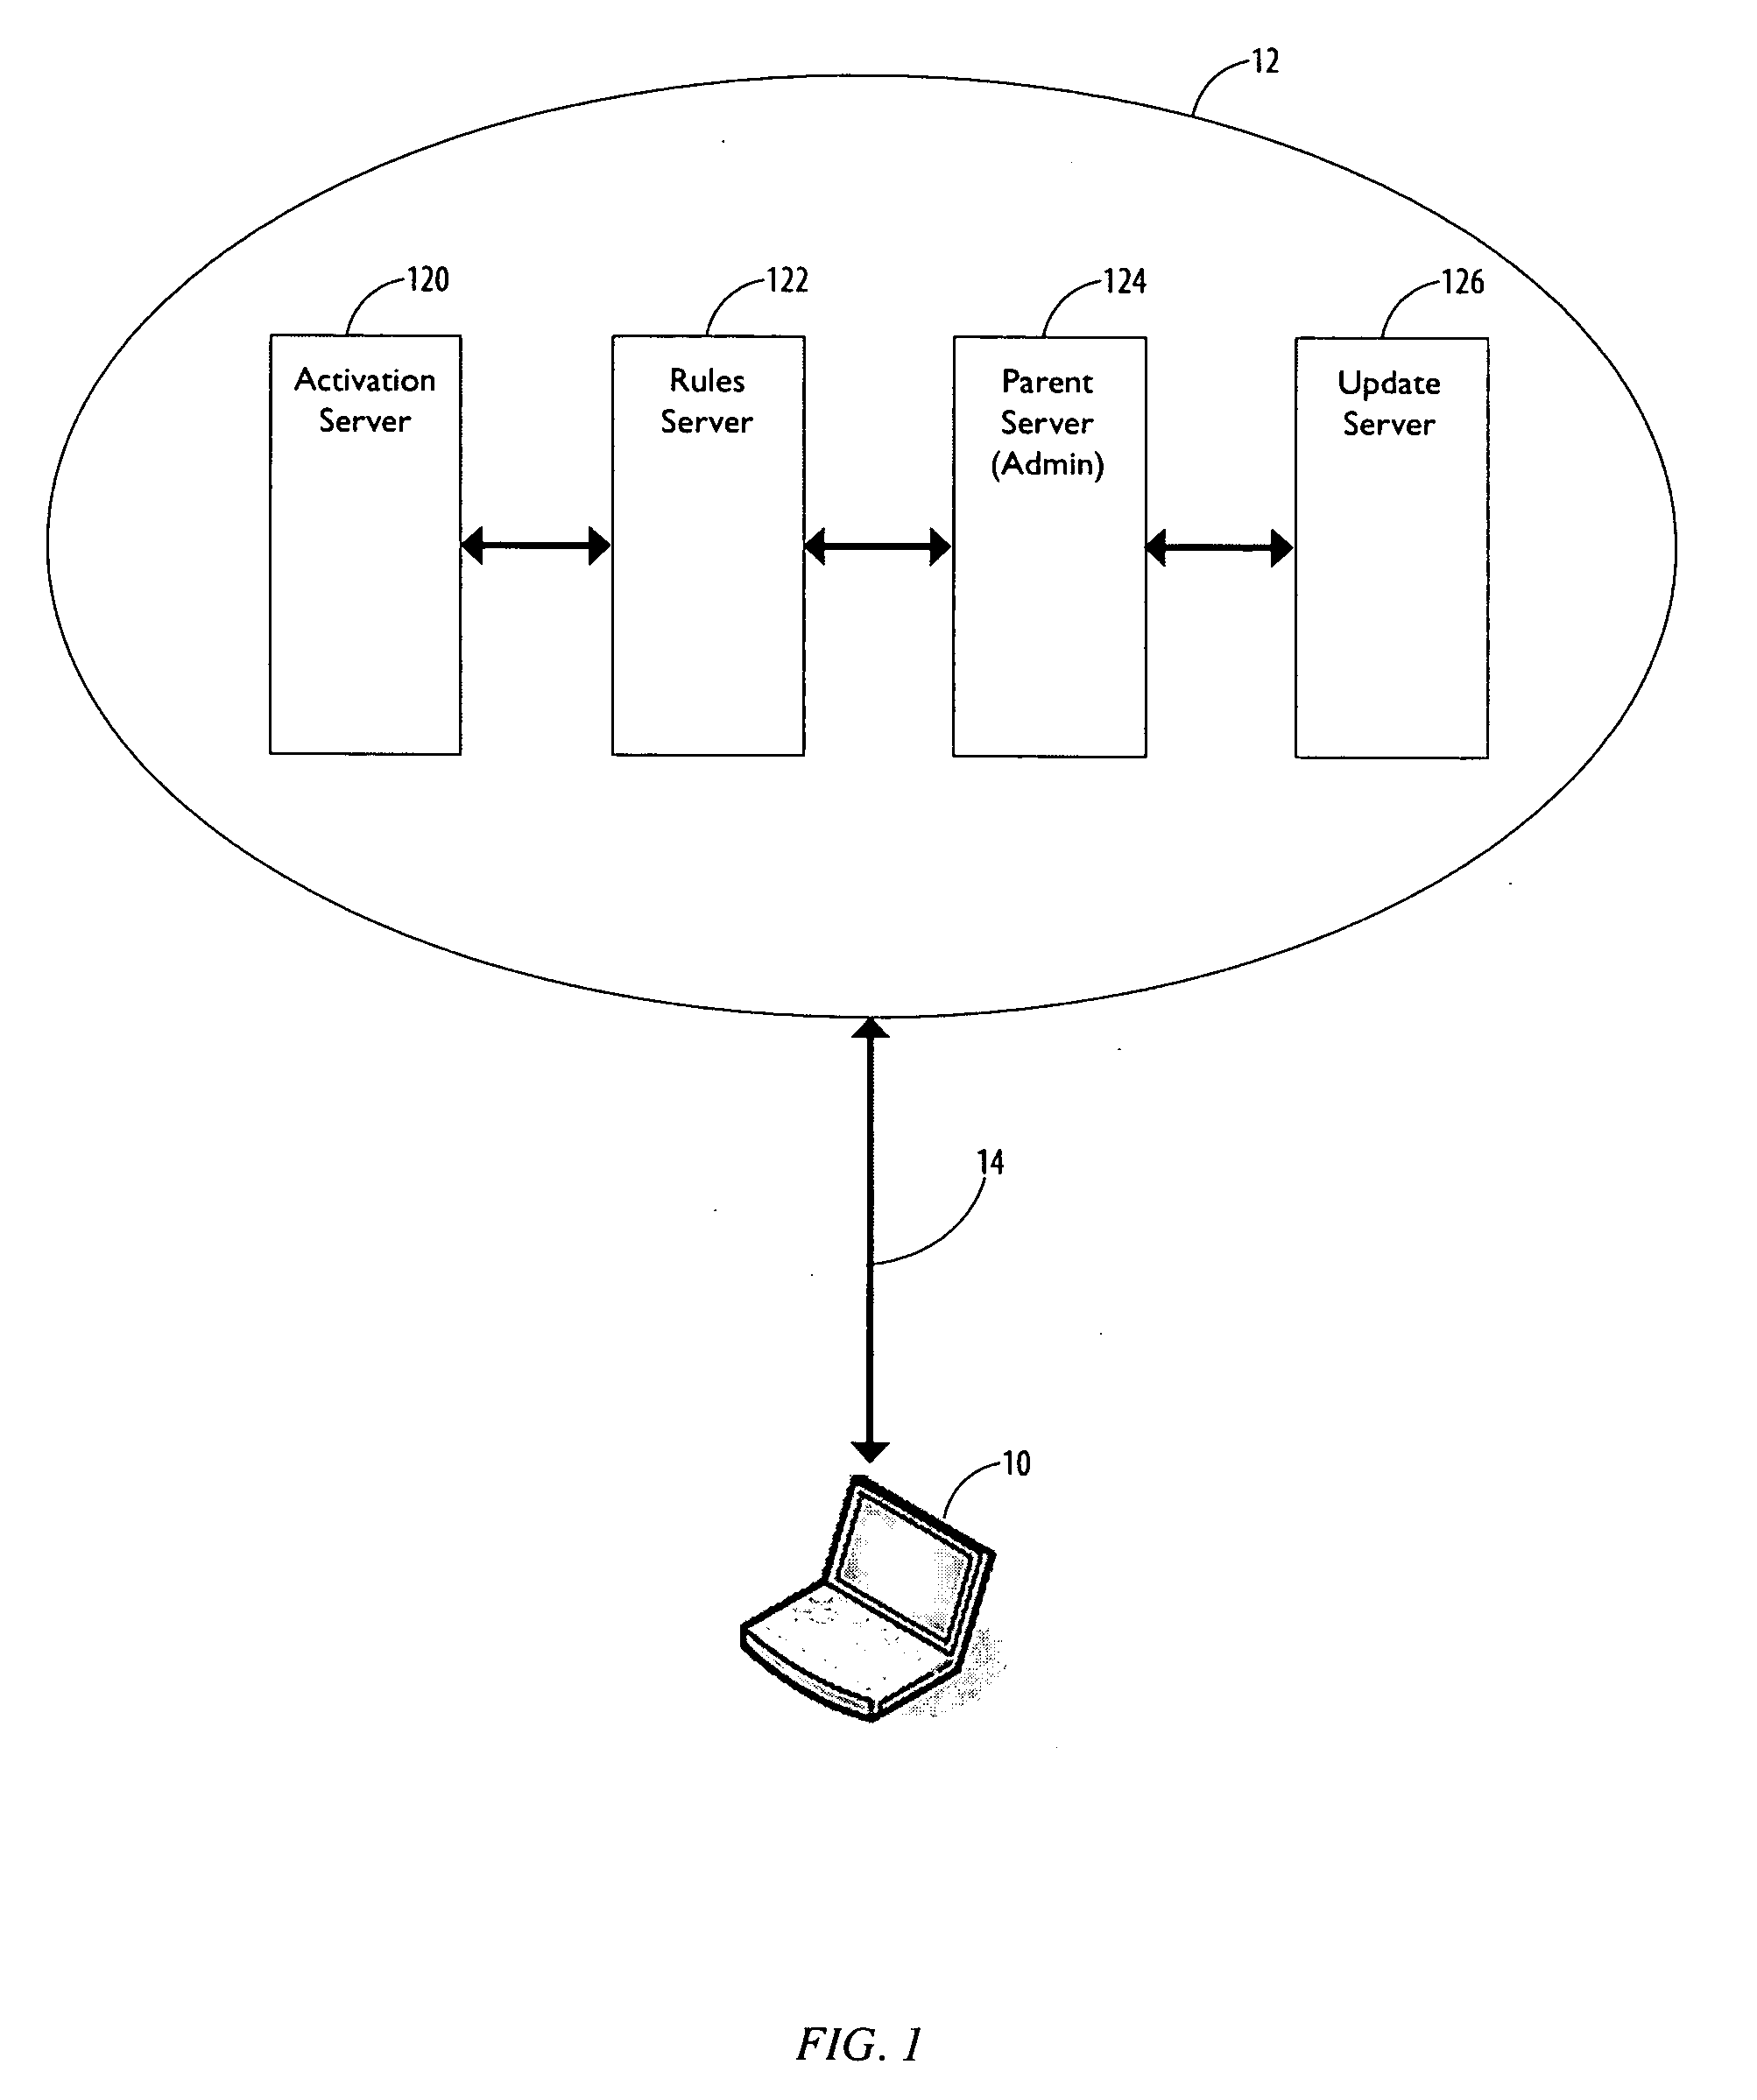 System and method for providing enterprise wide data security